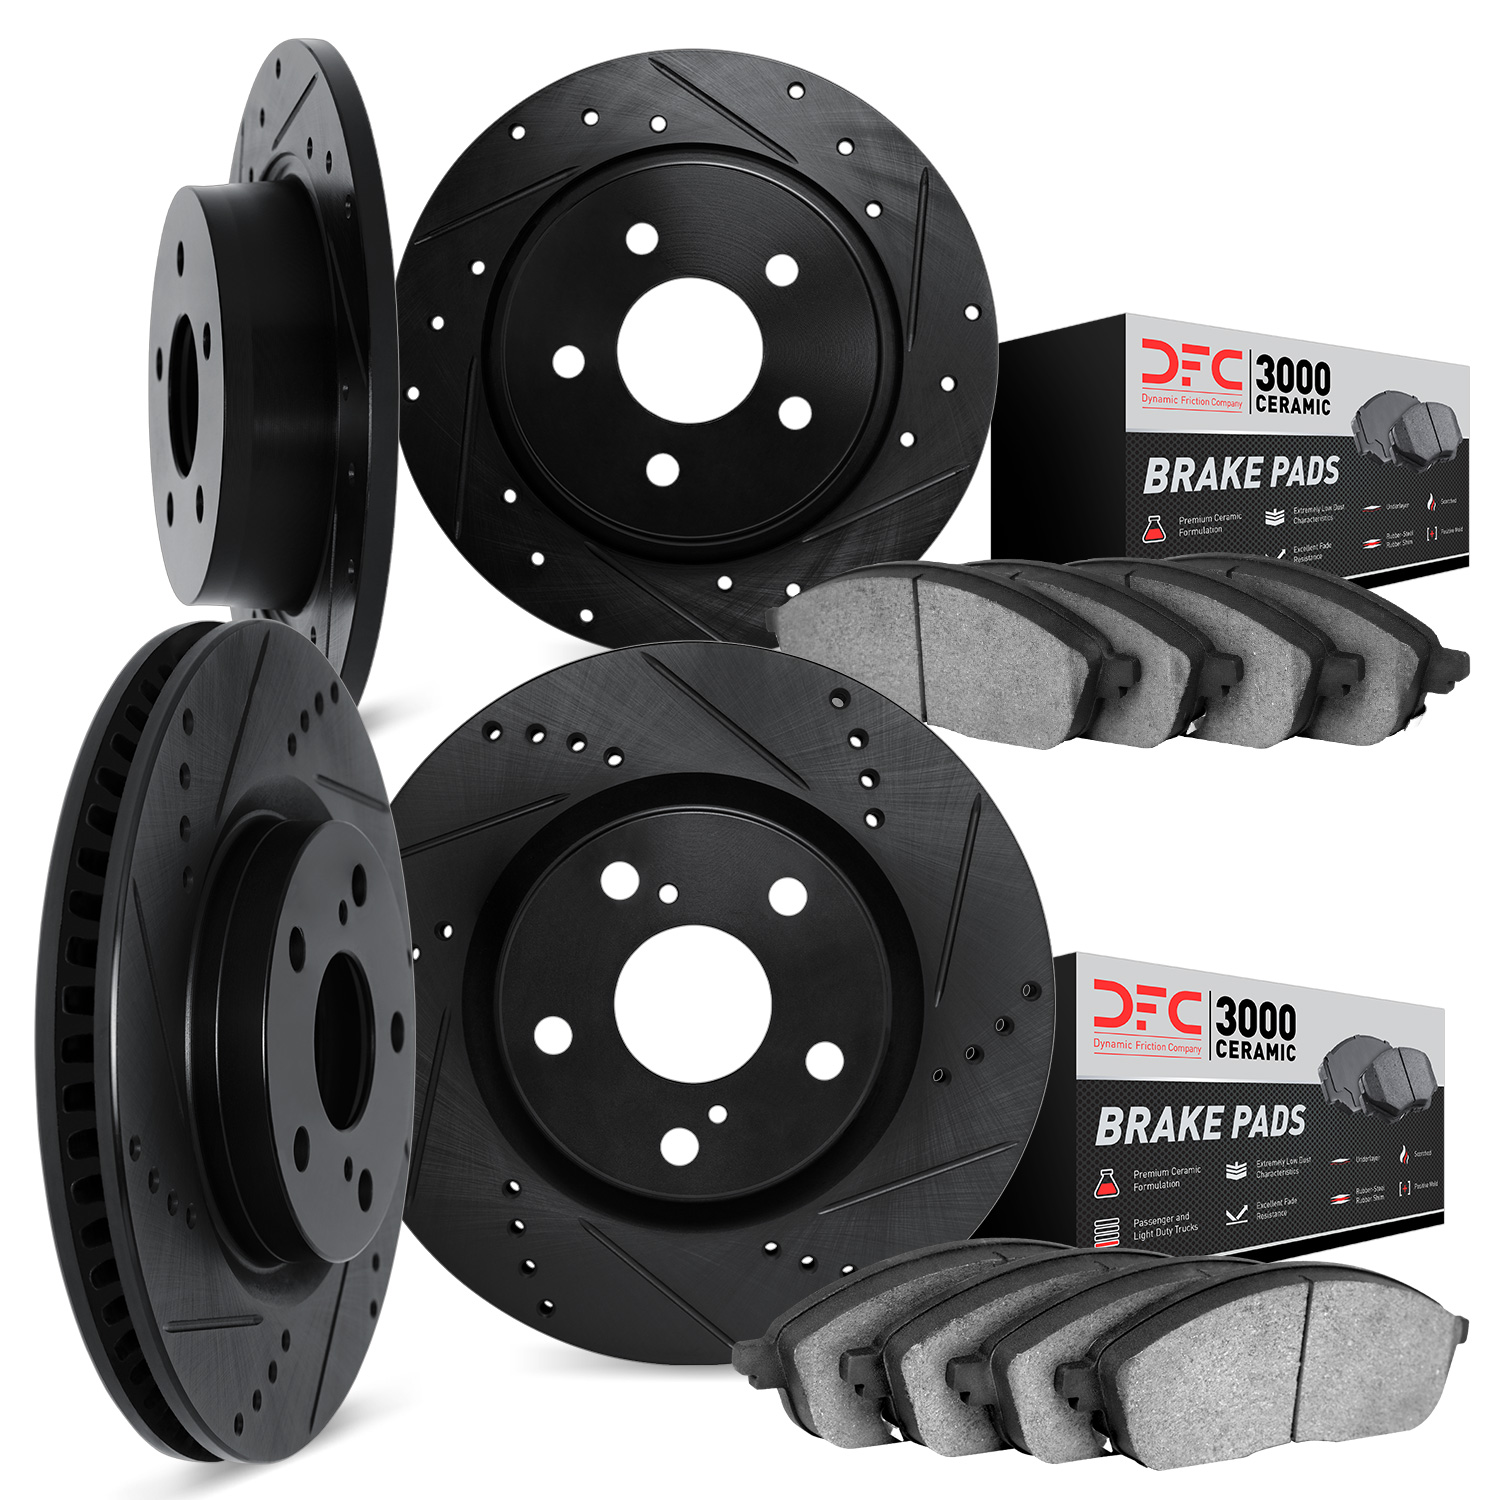 8304-39029 Drilled/Slotted Brake Rotors with 3000-Series Ceramic Brake Pads Kit [Black], 2016-2017 Mopar, Position: Front and Re